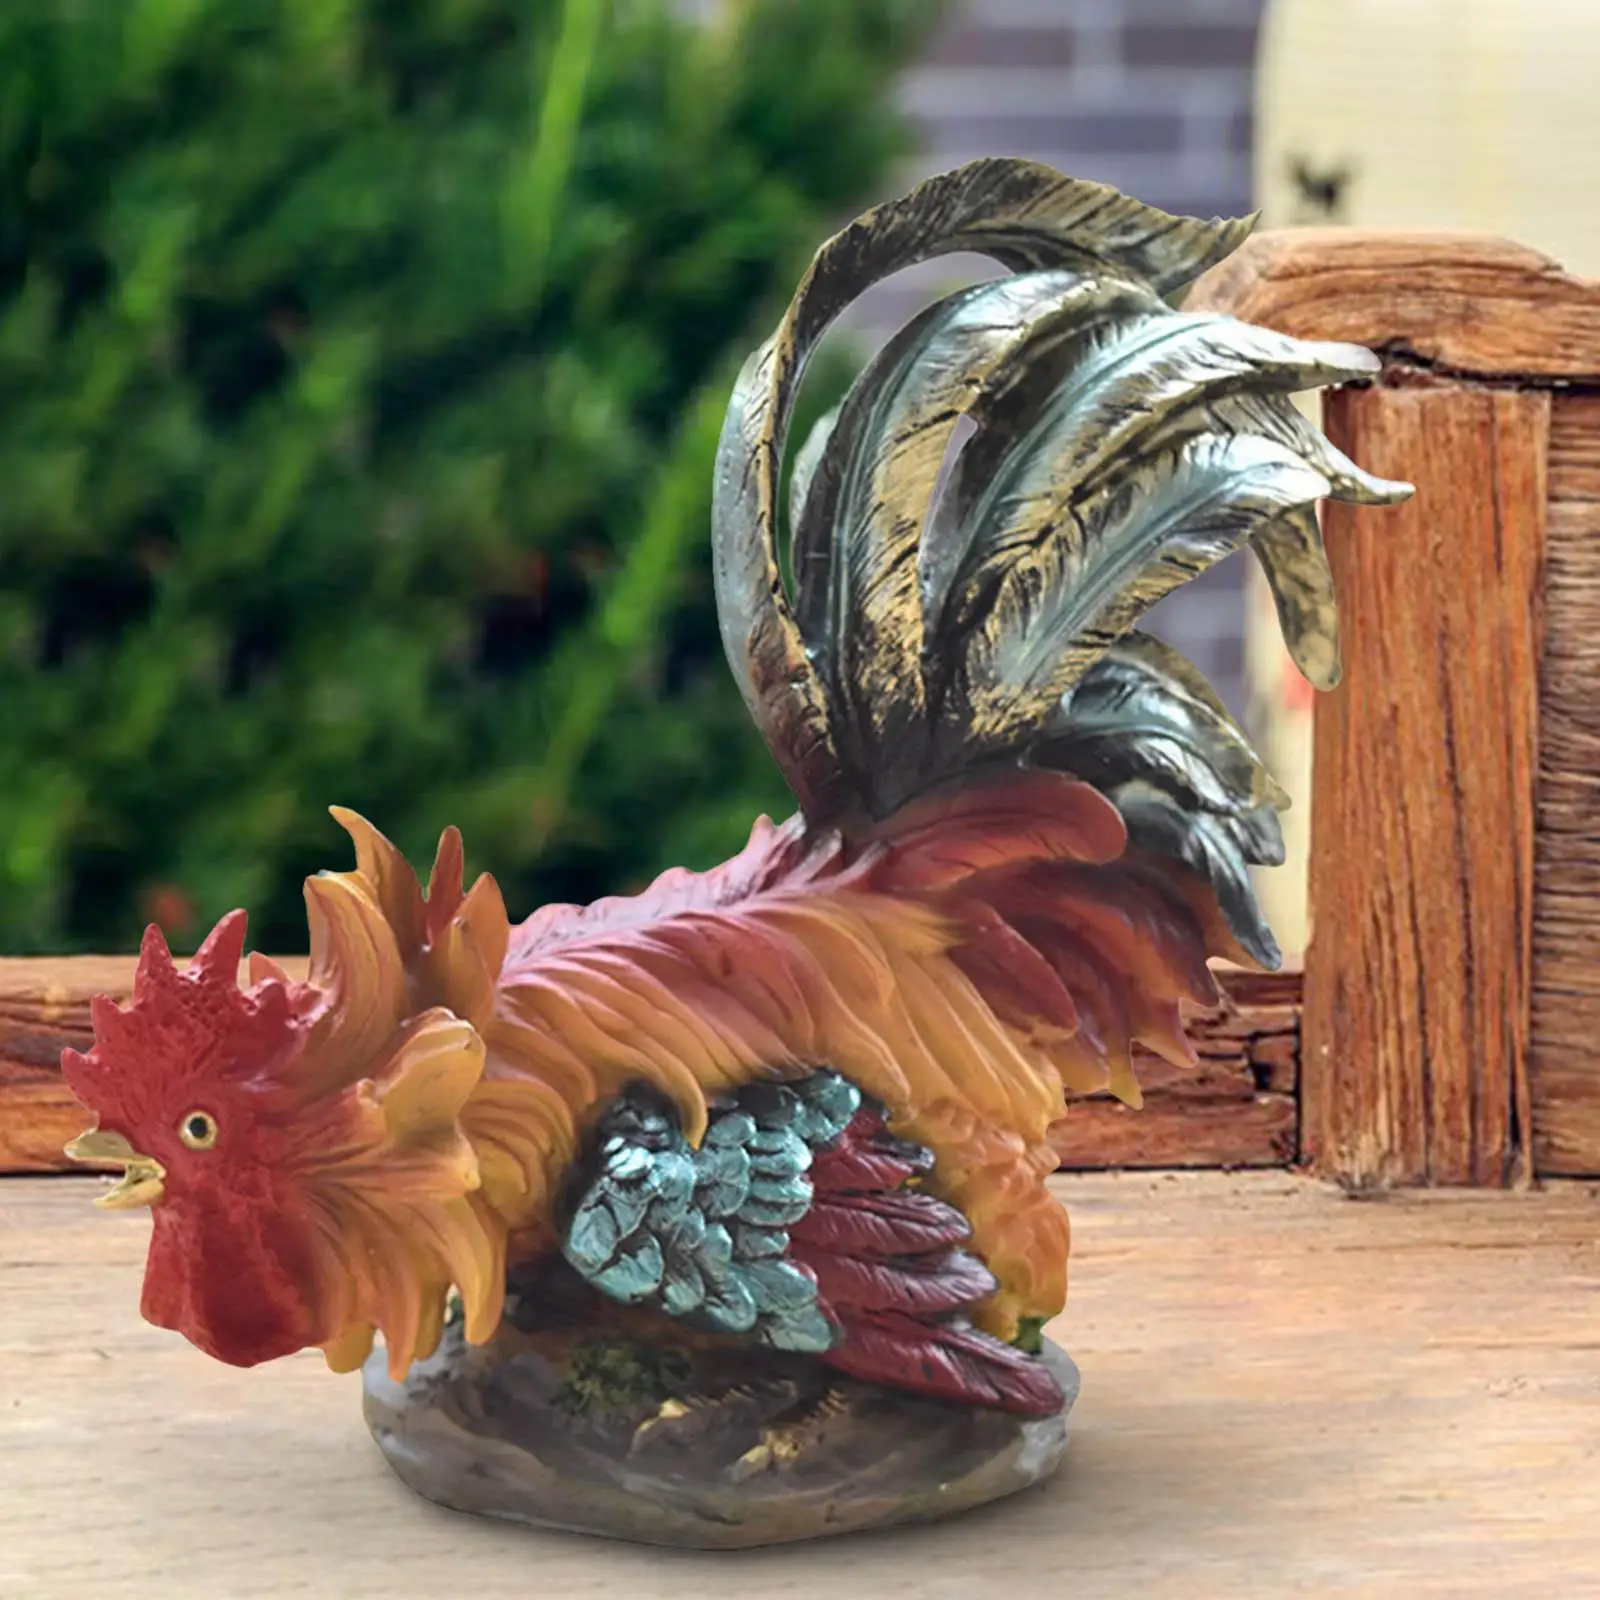 

Rooster Figurine Funny Chicken Creative Crafts Garden Decor Resin Sculpture Animal Statue for Outdoor Landscape Lawn Pond Yard